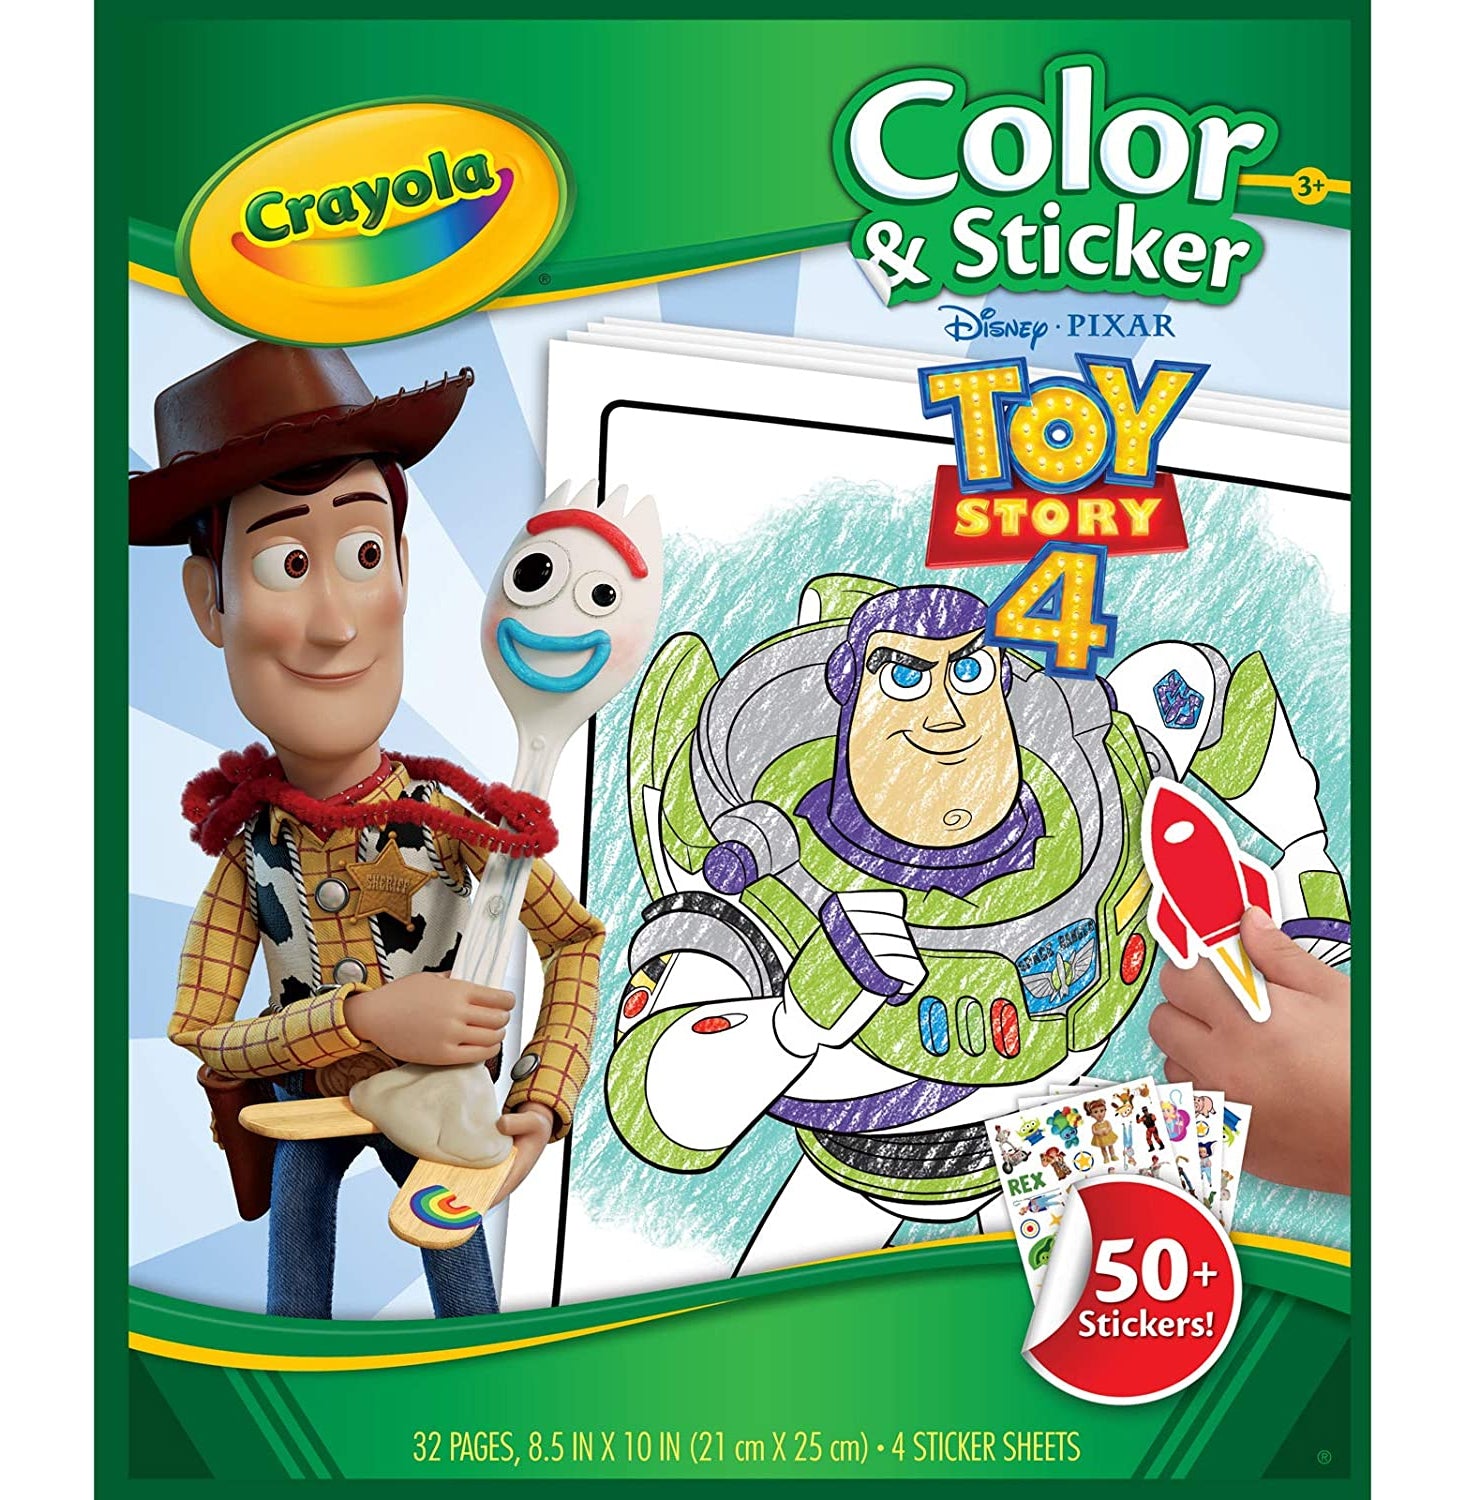  Crayola All That Glitters Art Case Coloring Set, Toys, Gift for Kids  Age 5+ : Toys & Games